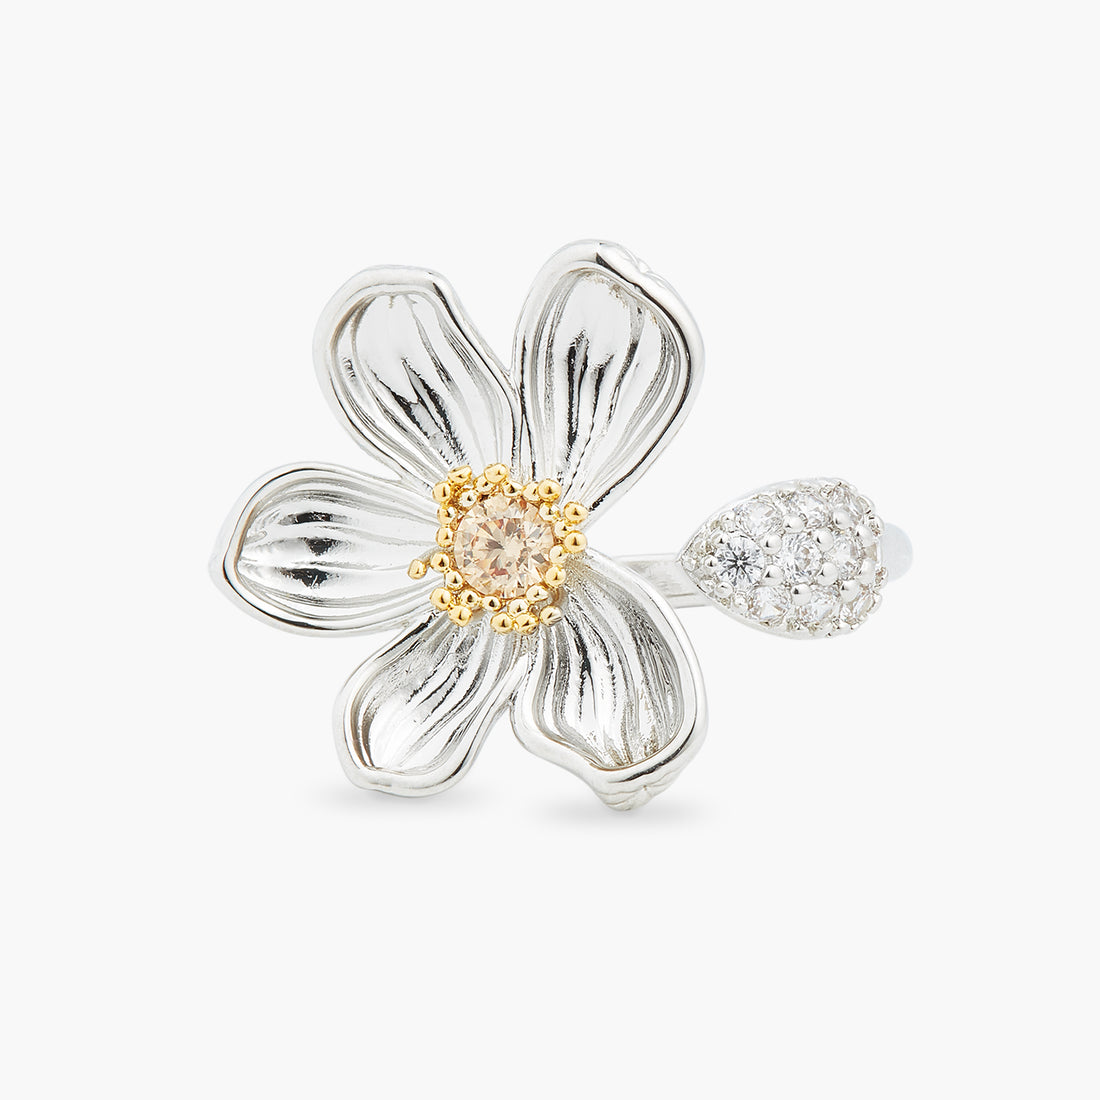 Les Néréides Daisy and Petal Paved with White Crystal Adjustable Ring